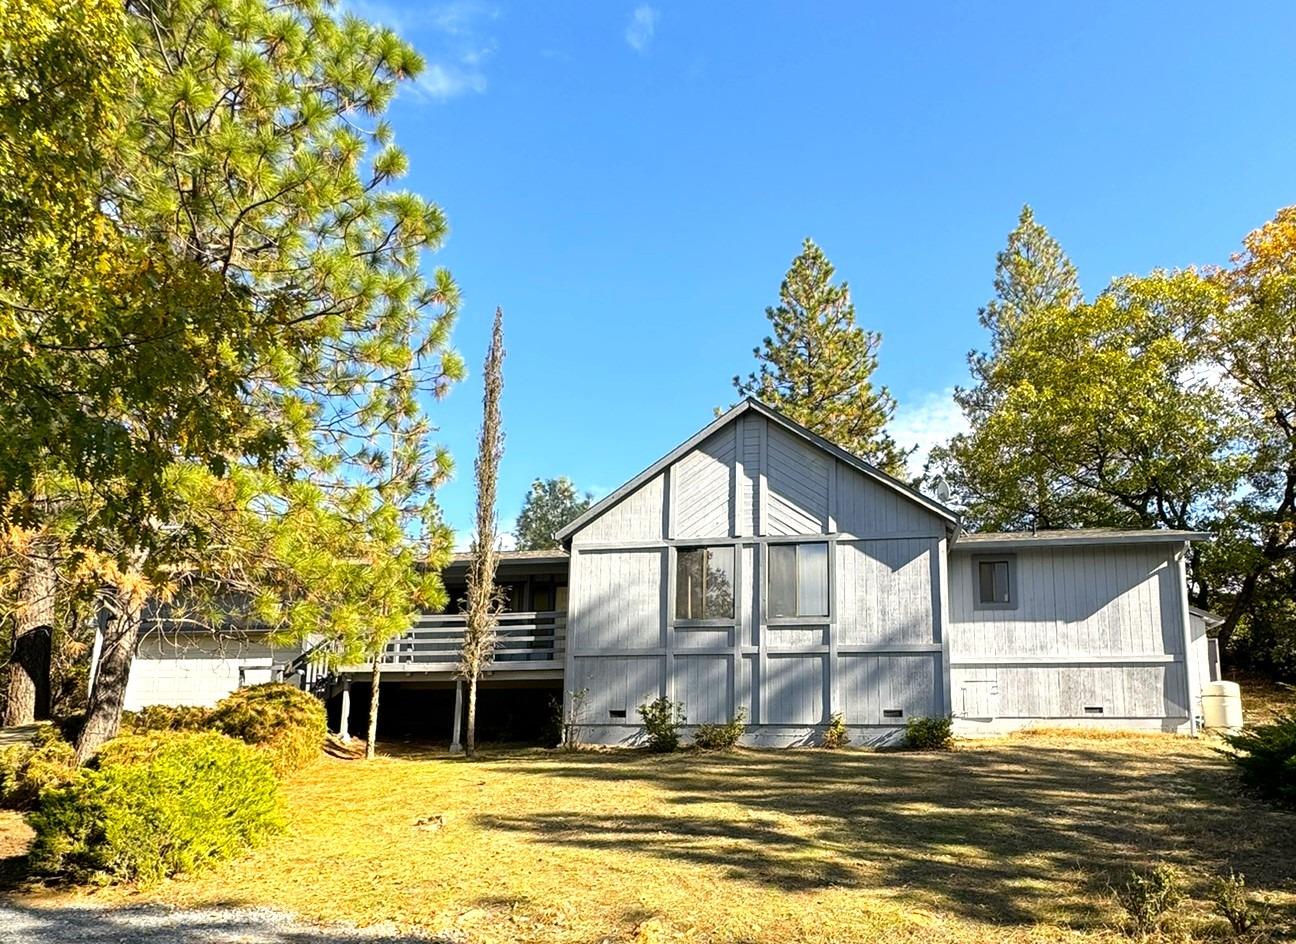 Photo of 2325 Bear Rock Rd in Placerville, CA